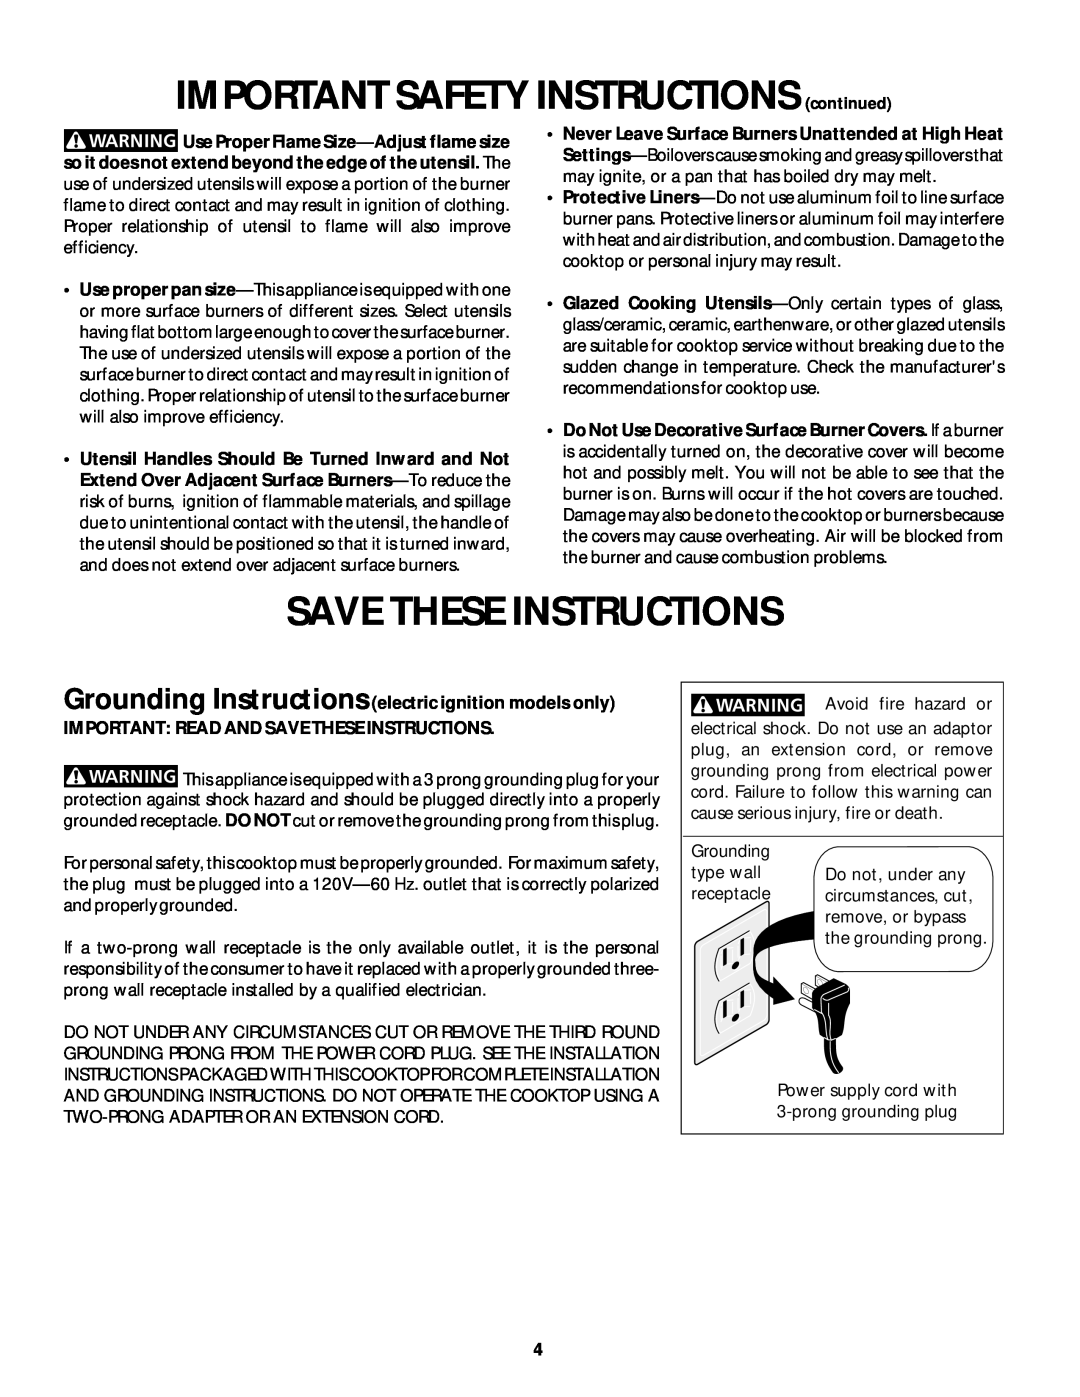 White-Westinghouse 318200659 manual IMPORTANT SAFETY INSTRUCTIONS continued, Save These Instructions 